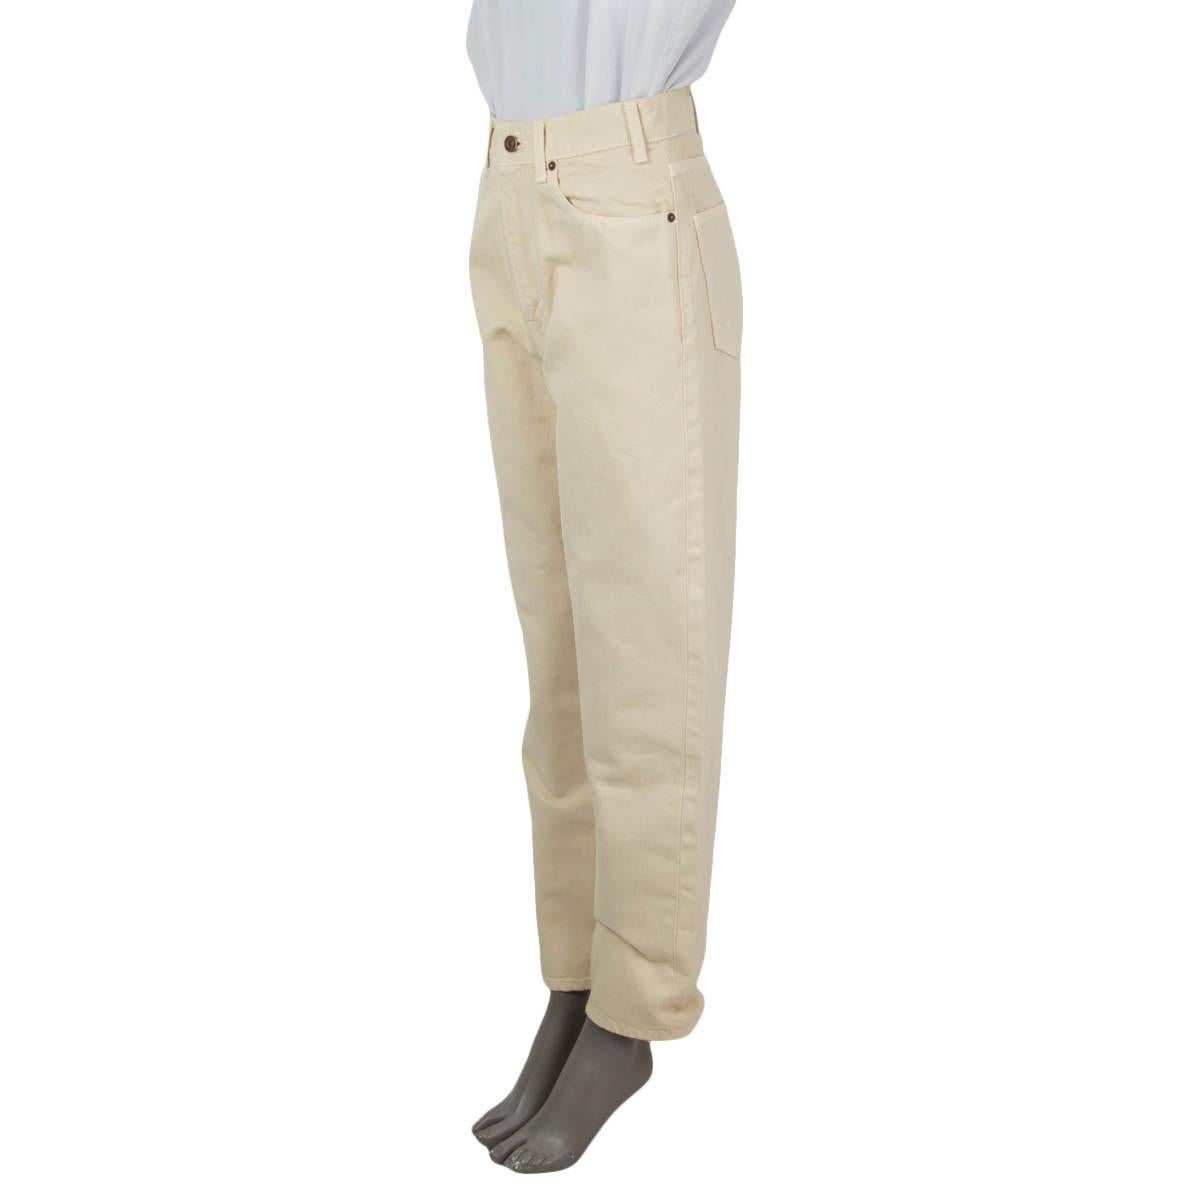 100% authentic Celine straight leg jeans in beige cotton (100%). Open with a zipper and one button in the front. Feature a high waist cut, belt loops, a coin pocket and two rounded slit pockets on the front and two slit pockets on the back. Have